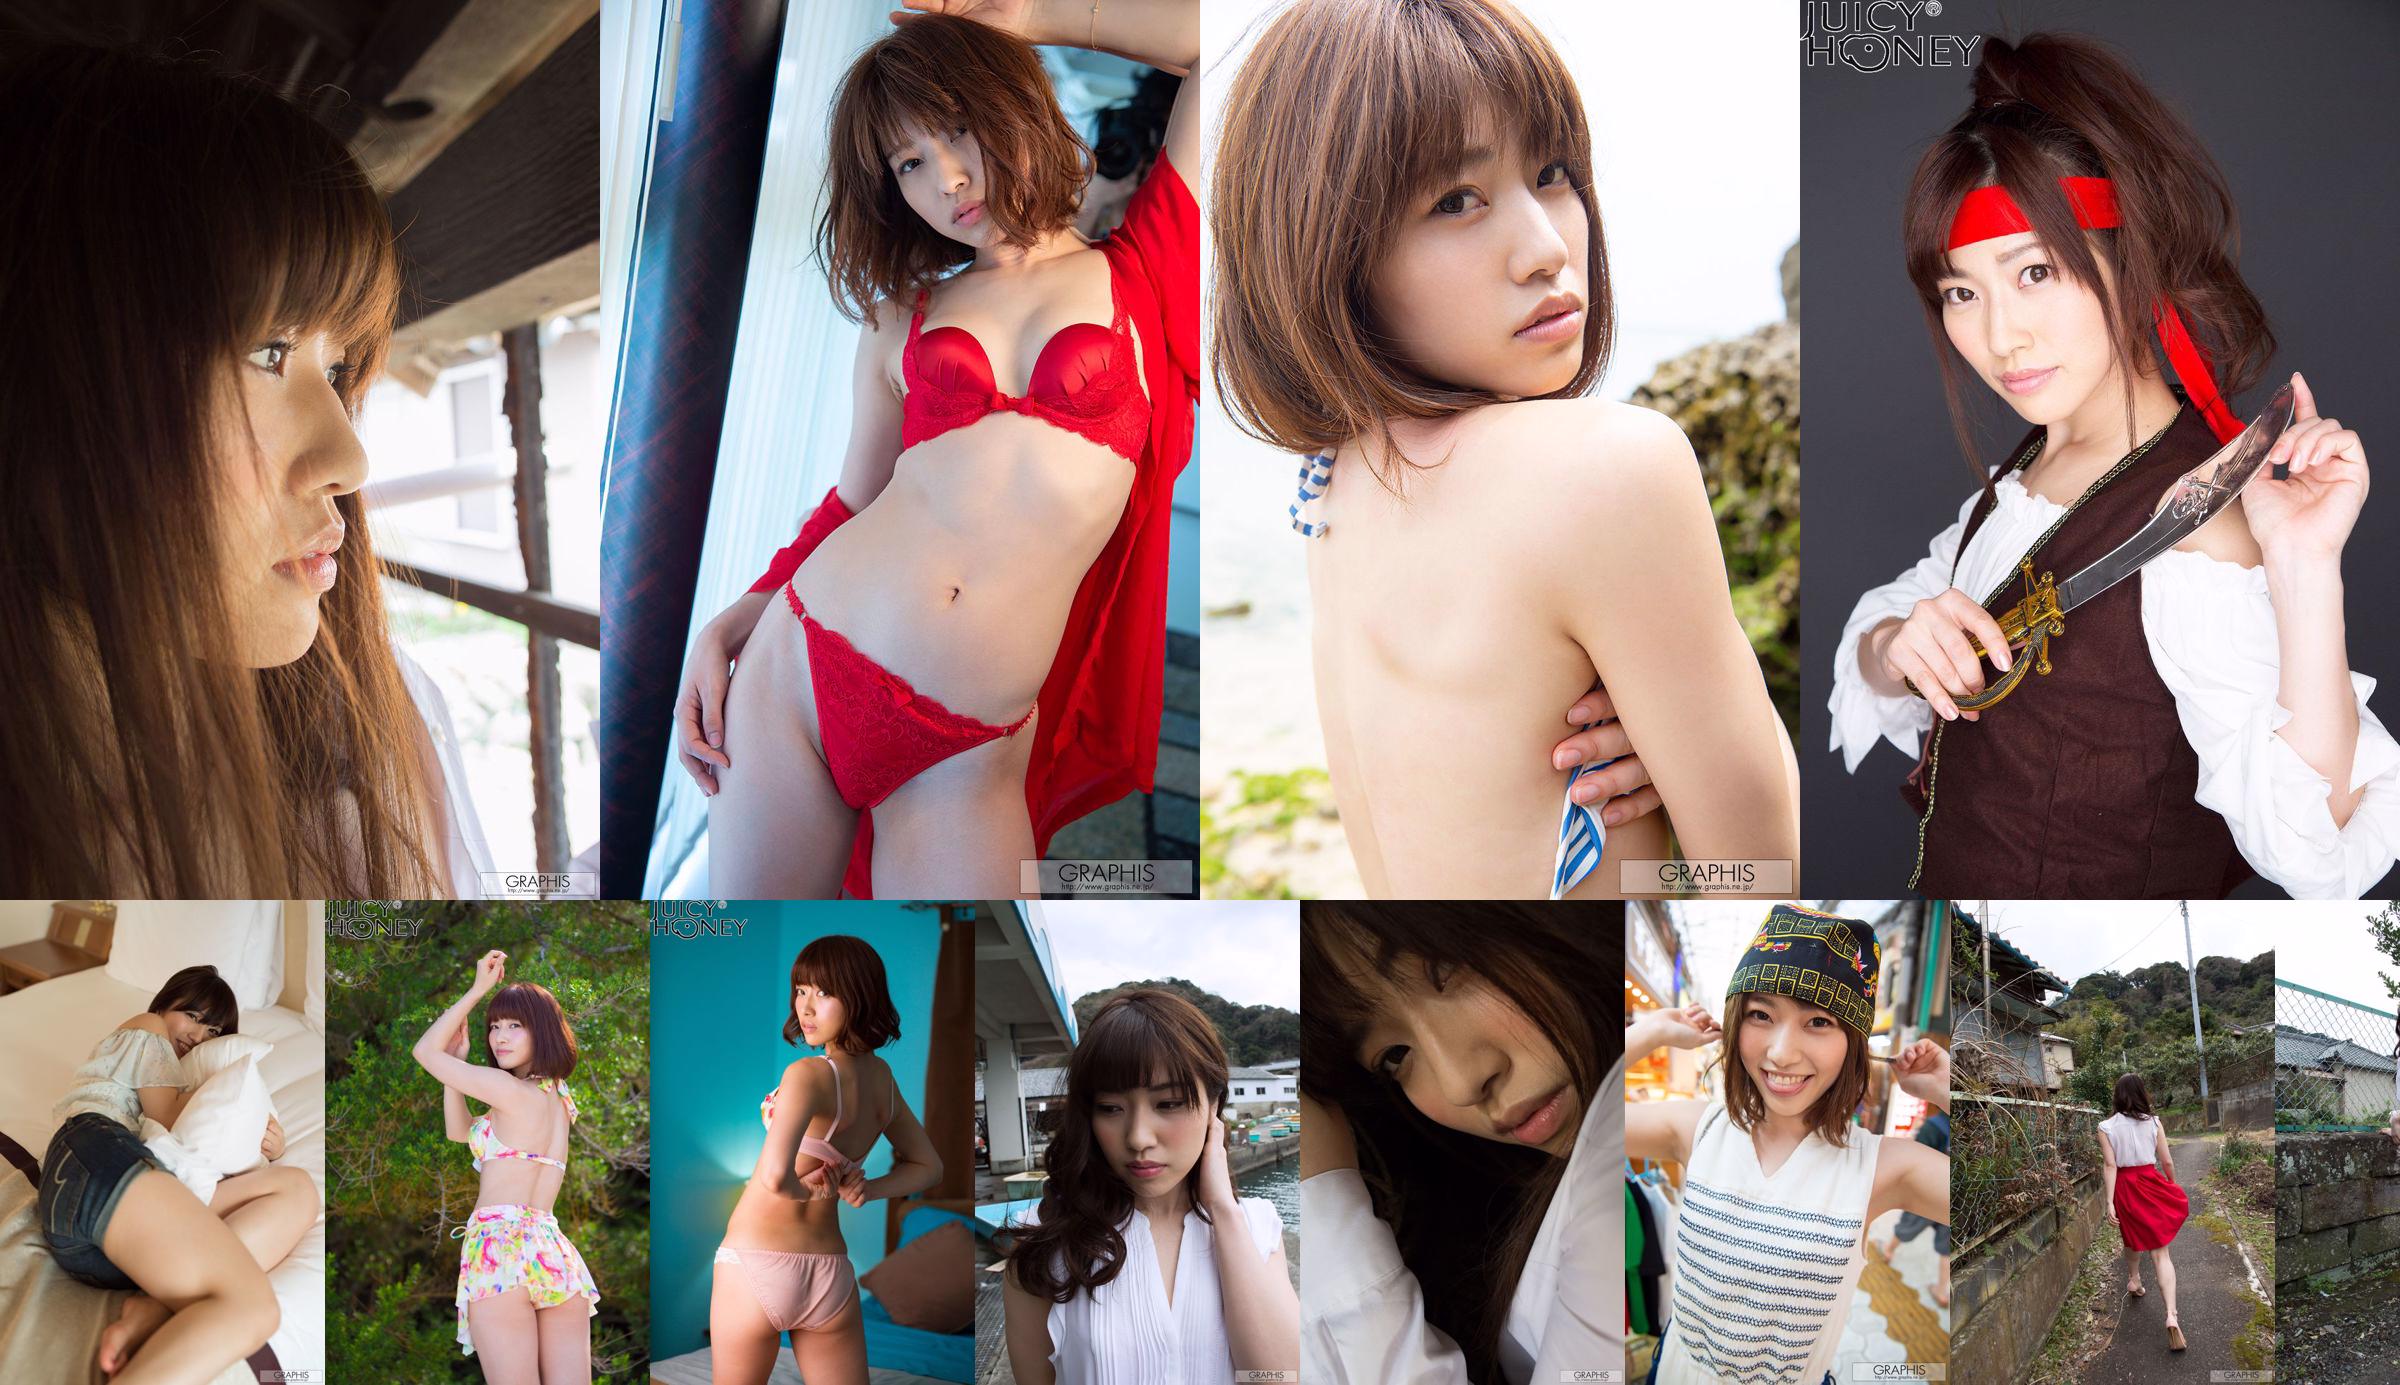 Masami Ichikawa 市川まさみ [Graphis] SPECIAL GALLERY No.4fd986 ページ7